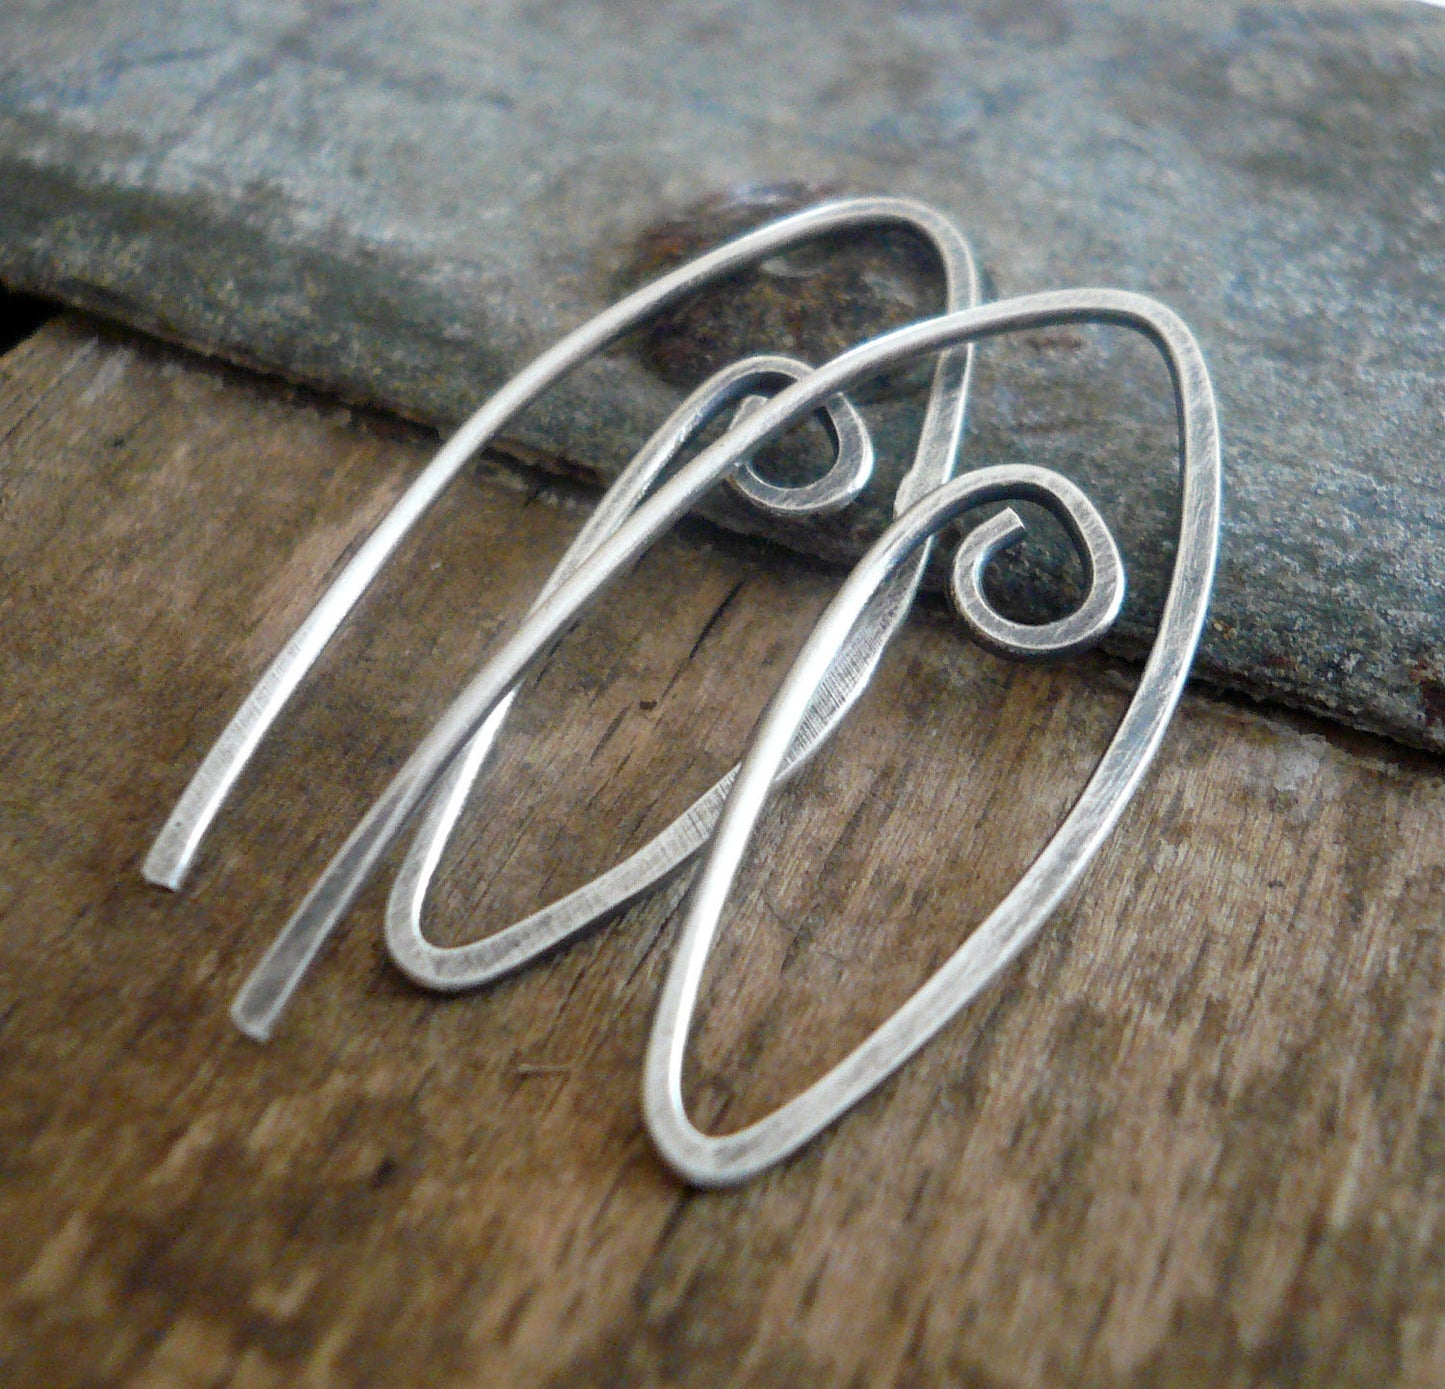 12 Pairs of my Furl Sterling Silver Earwires - Handmade. Handforged. Oxidized & polished